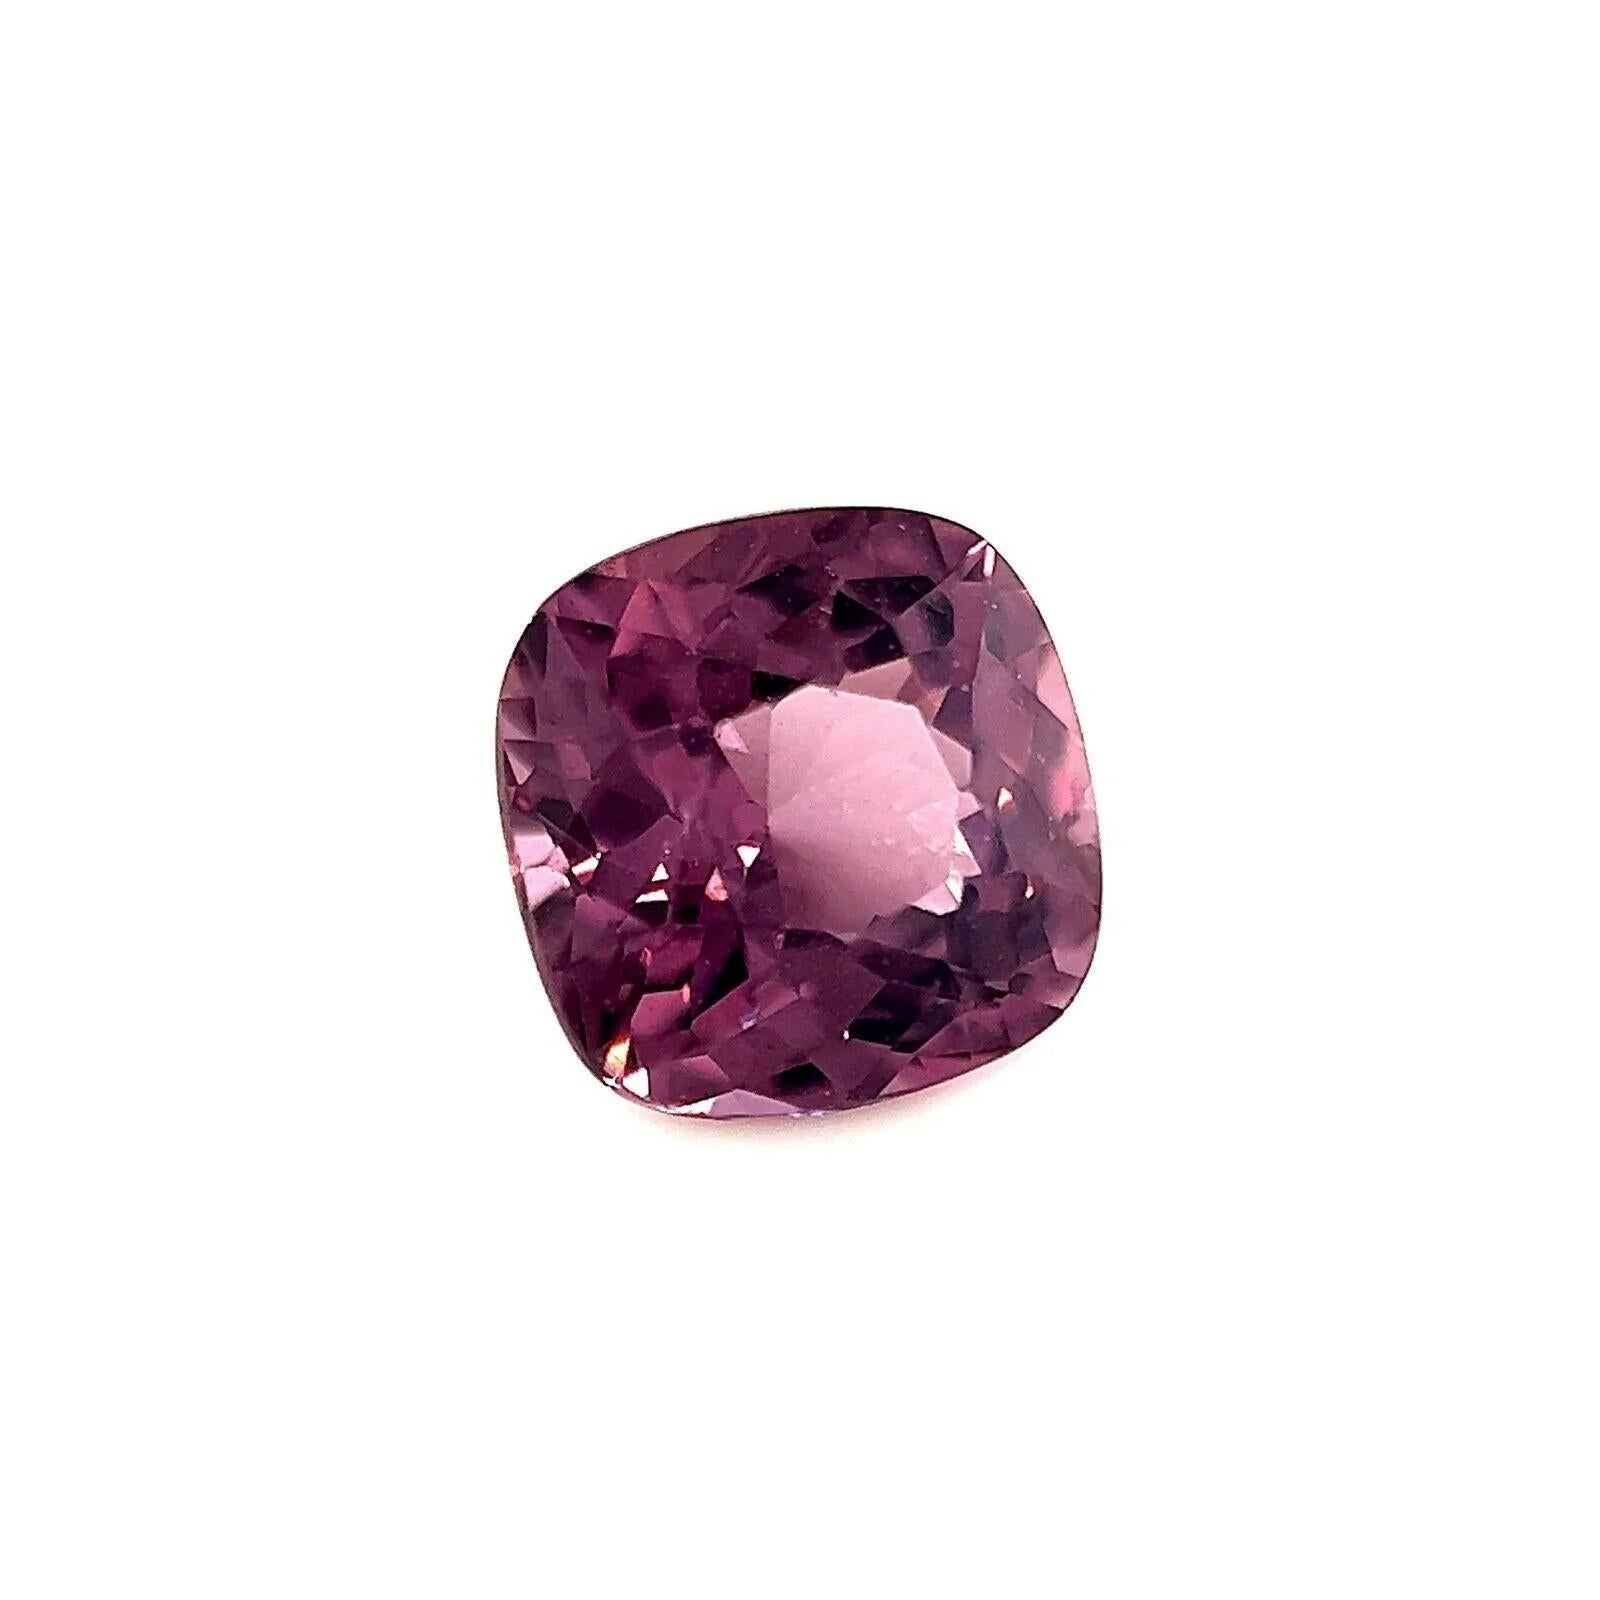 Fine Vivid Purple Pink Spinel 1.39ct Custom Cushion Cut 6.5x6.4mm Rare Loose Gem

Natural Purple Violet Spinel Gemstone.
Beautiful natural 1.39 Carat spinel with a vivid pink purple colour and very good clarity. Also has an excellent custom cushion